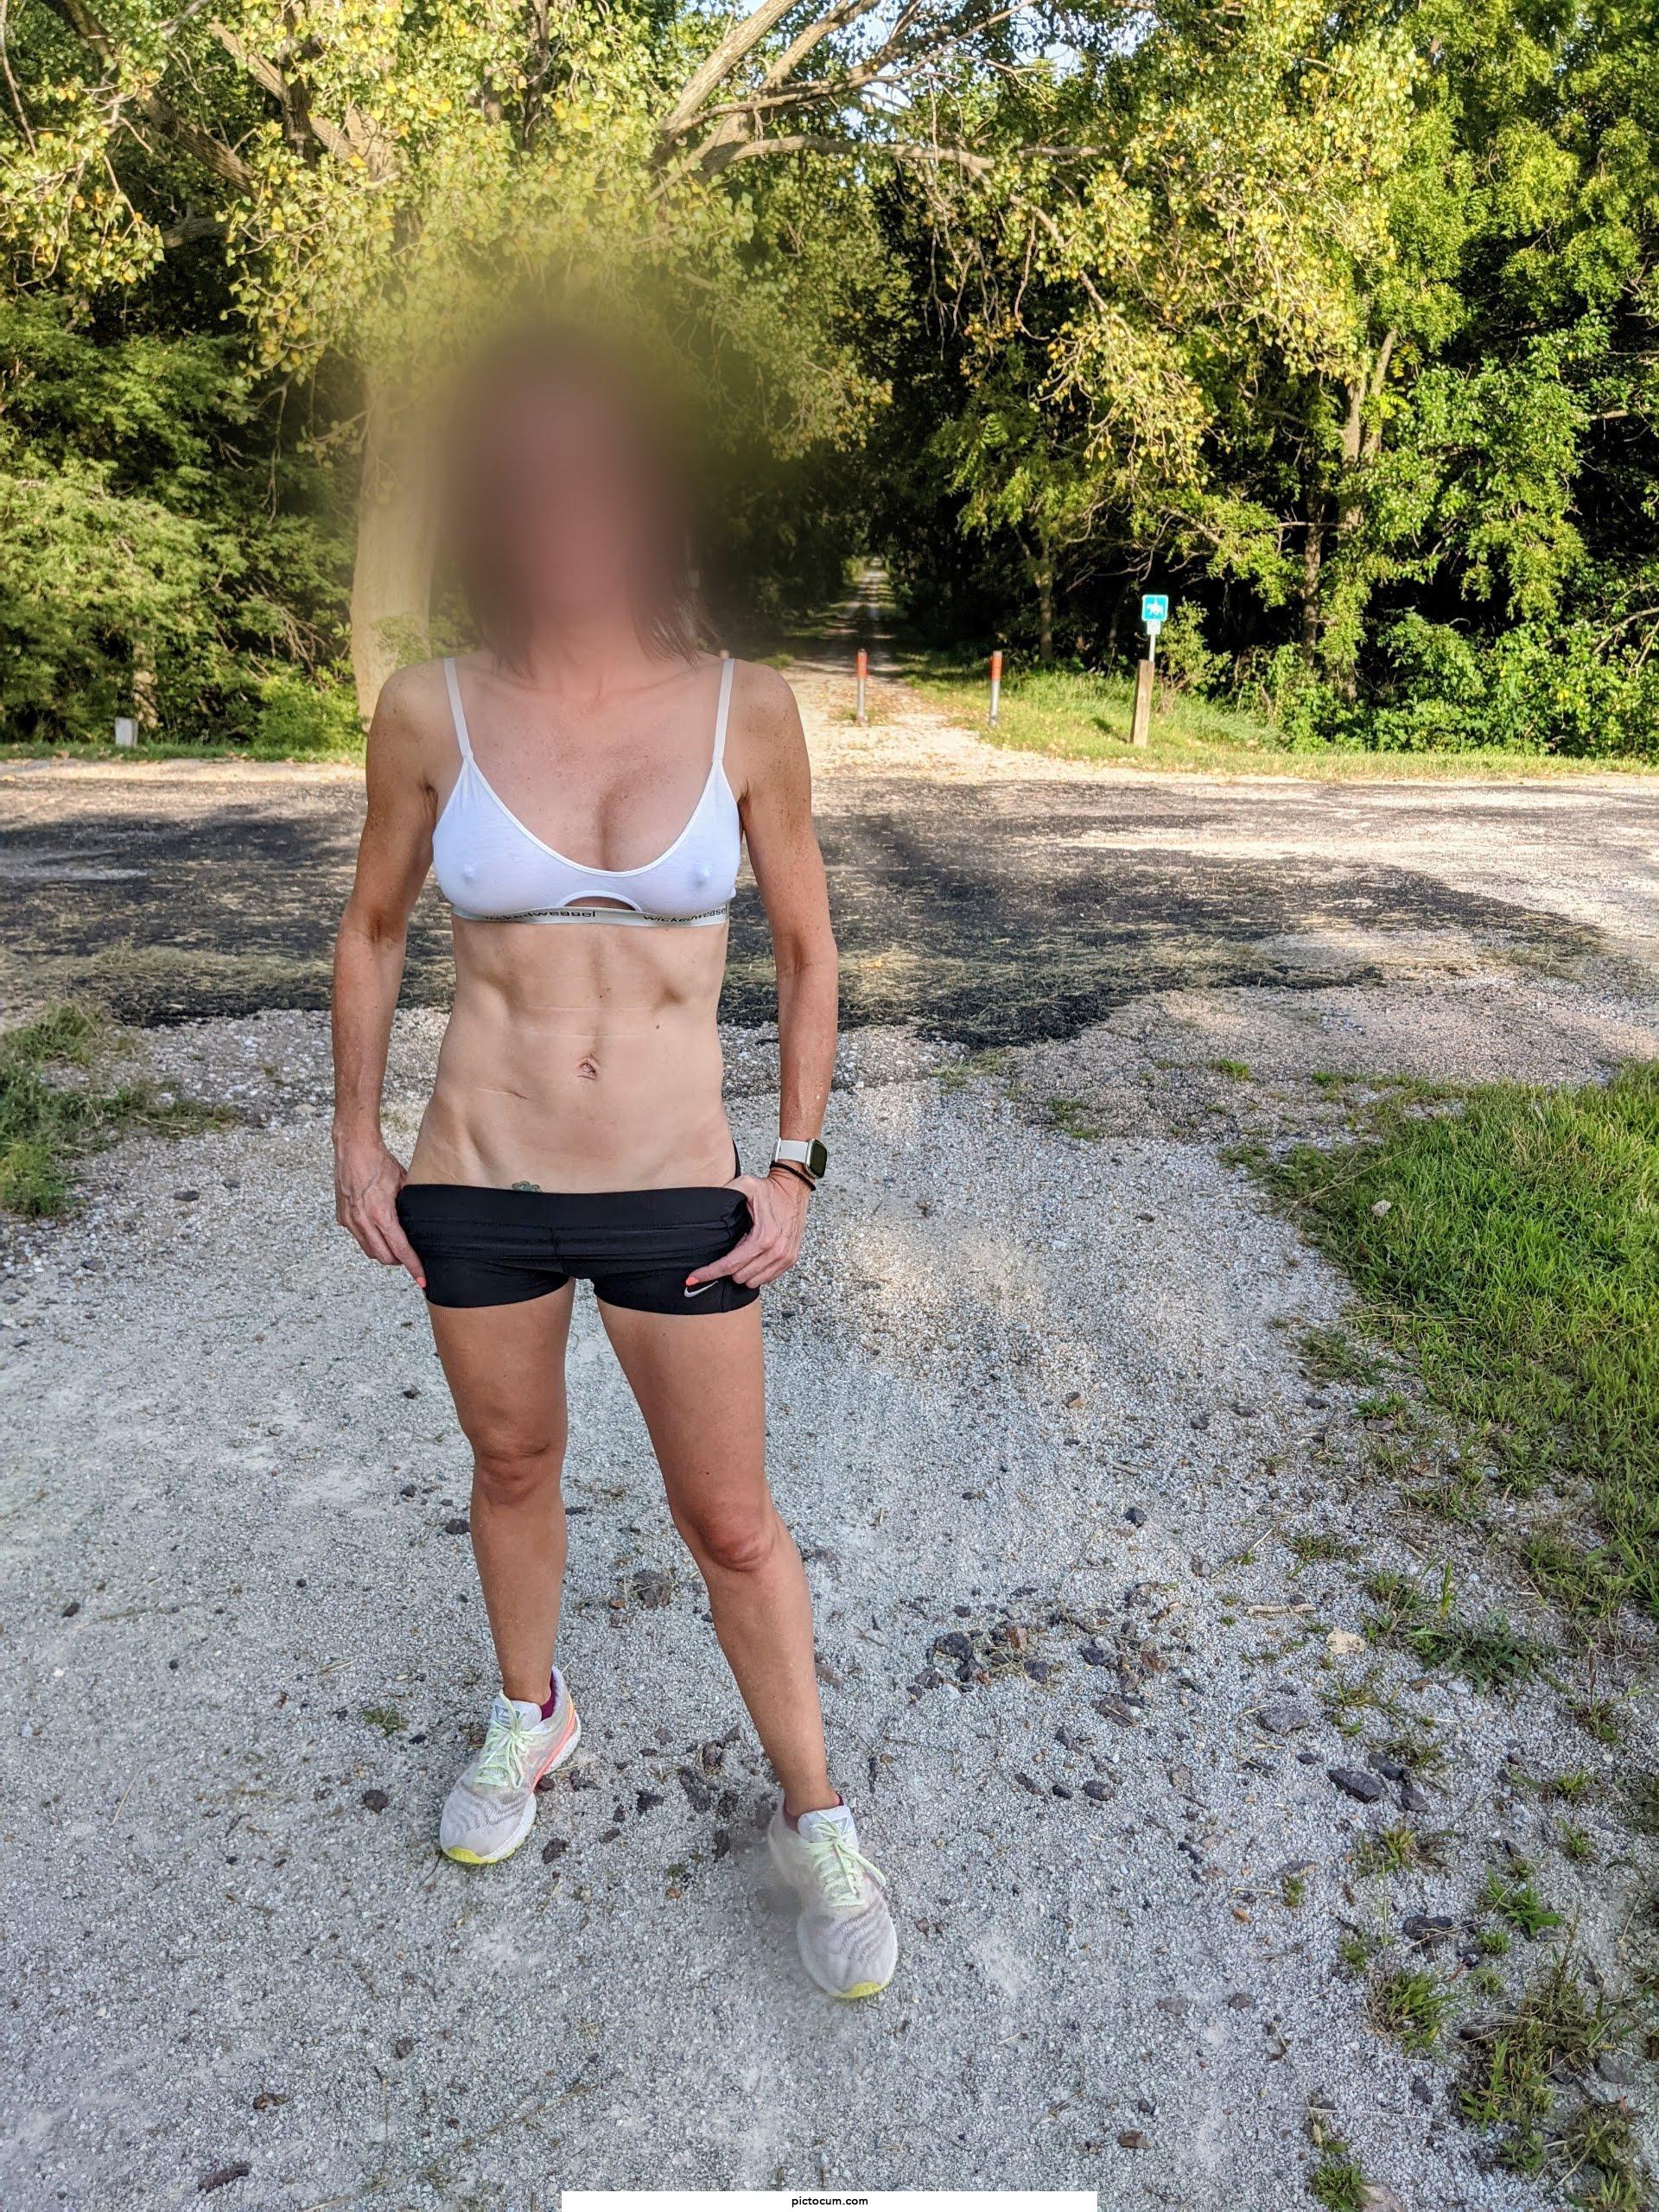 Wife wore her thin sports bra on the local running trail, would she get your attention?